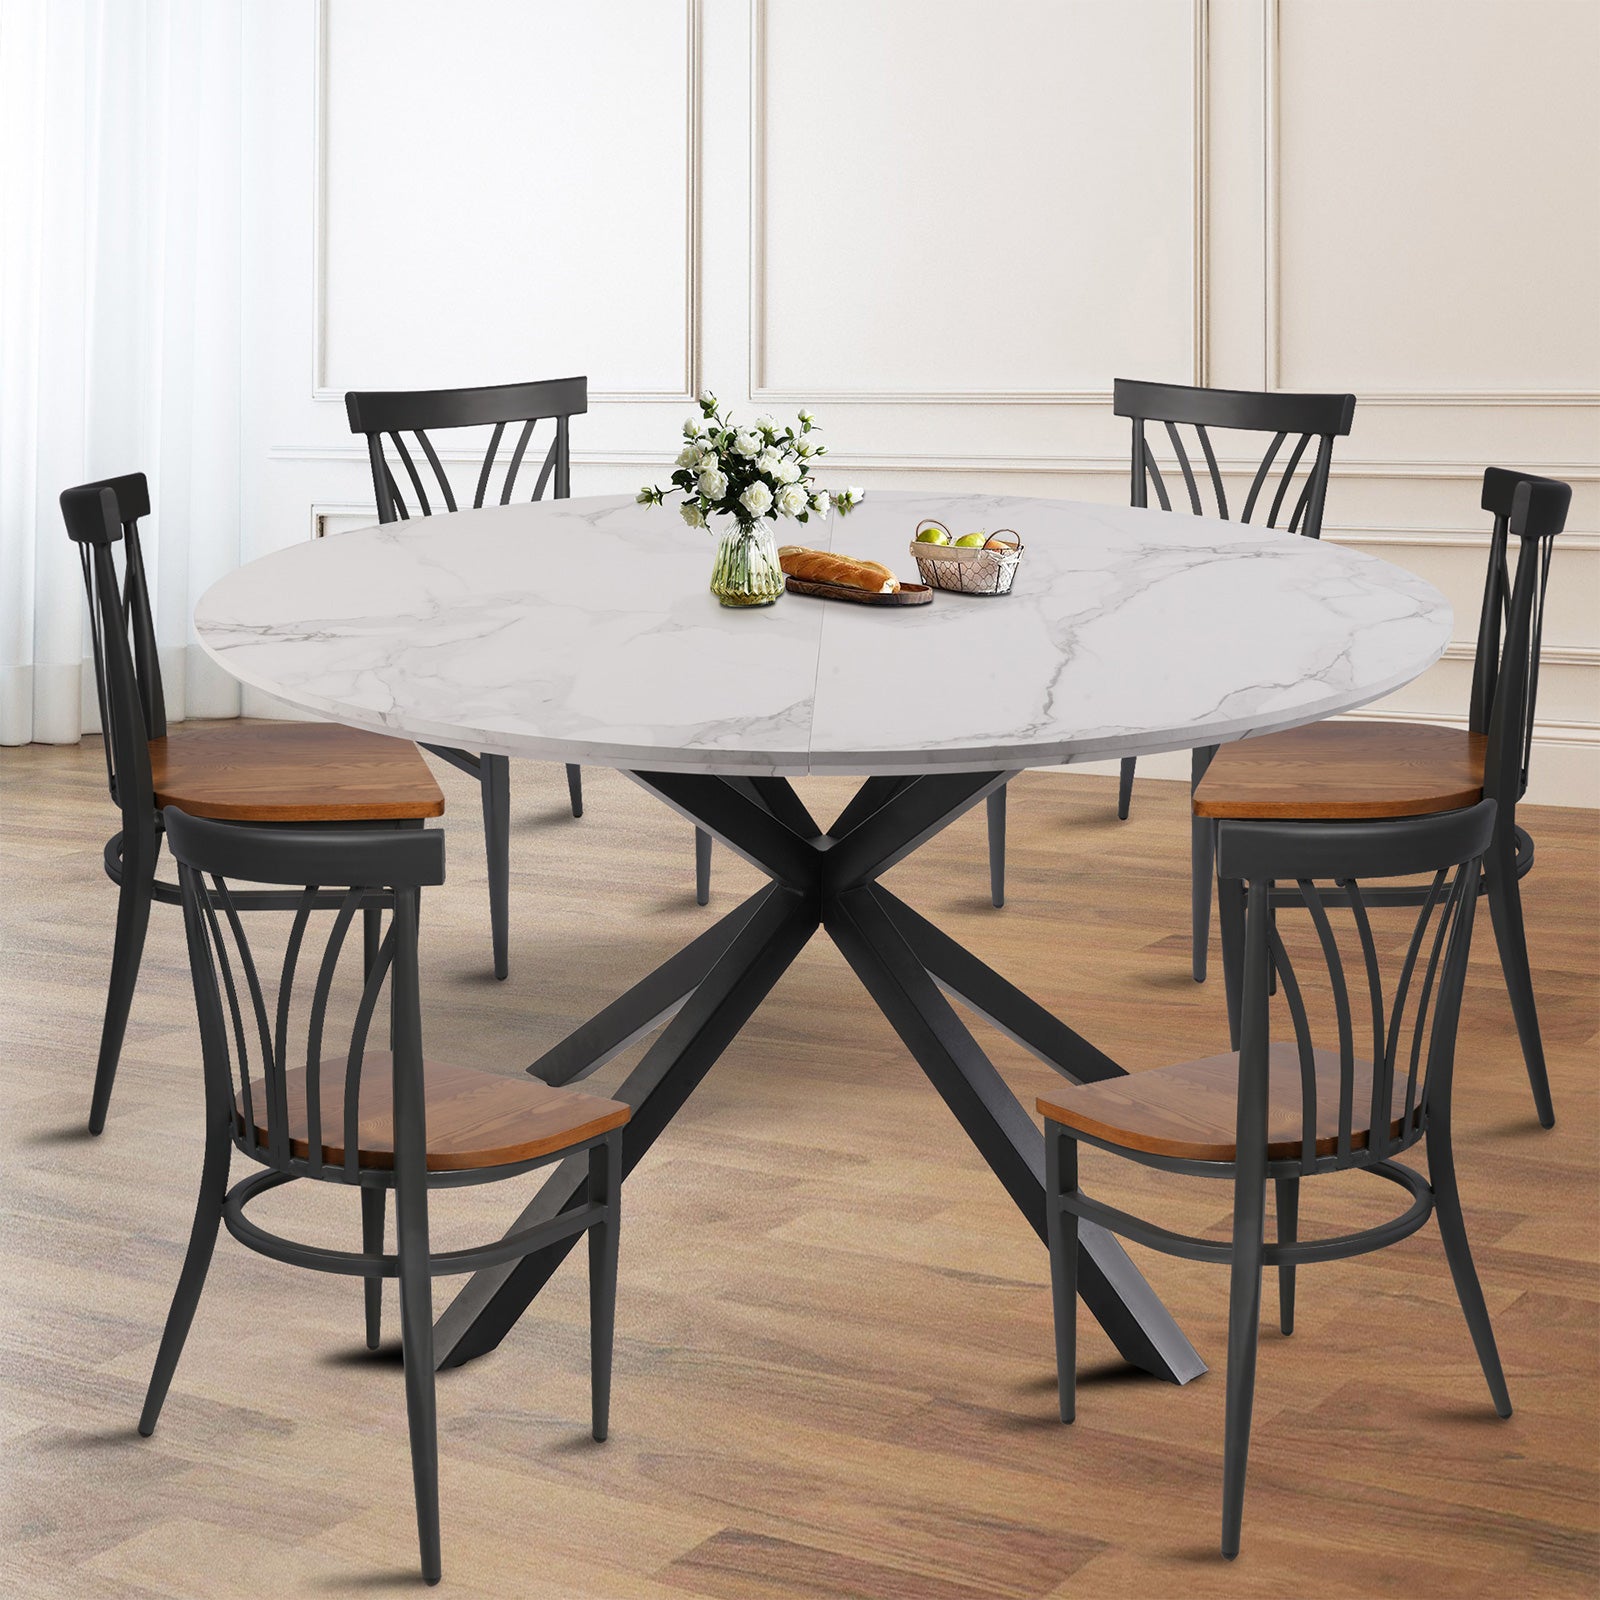 53" Mid-Century Modern Round Dining Table for 4-6 Person W/Solid Metal Legs, Marble Texture